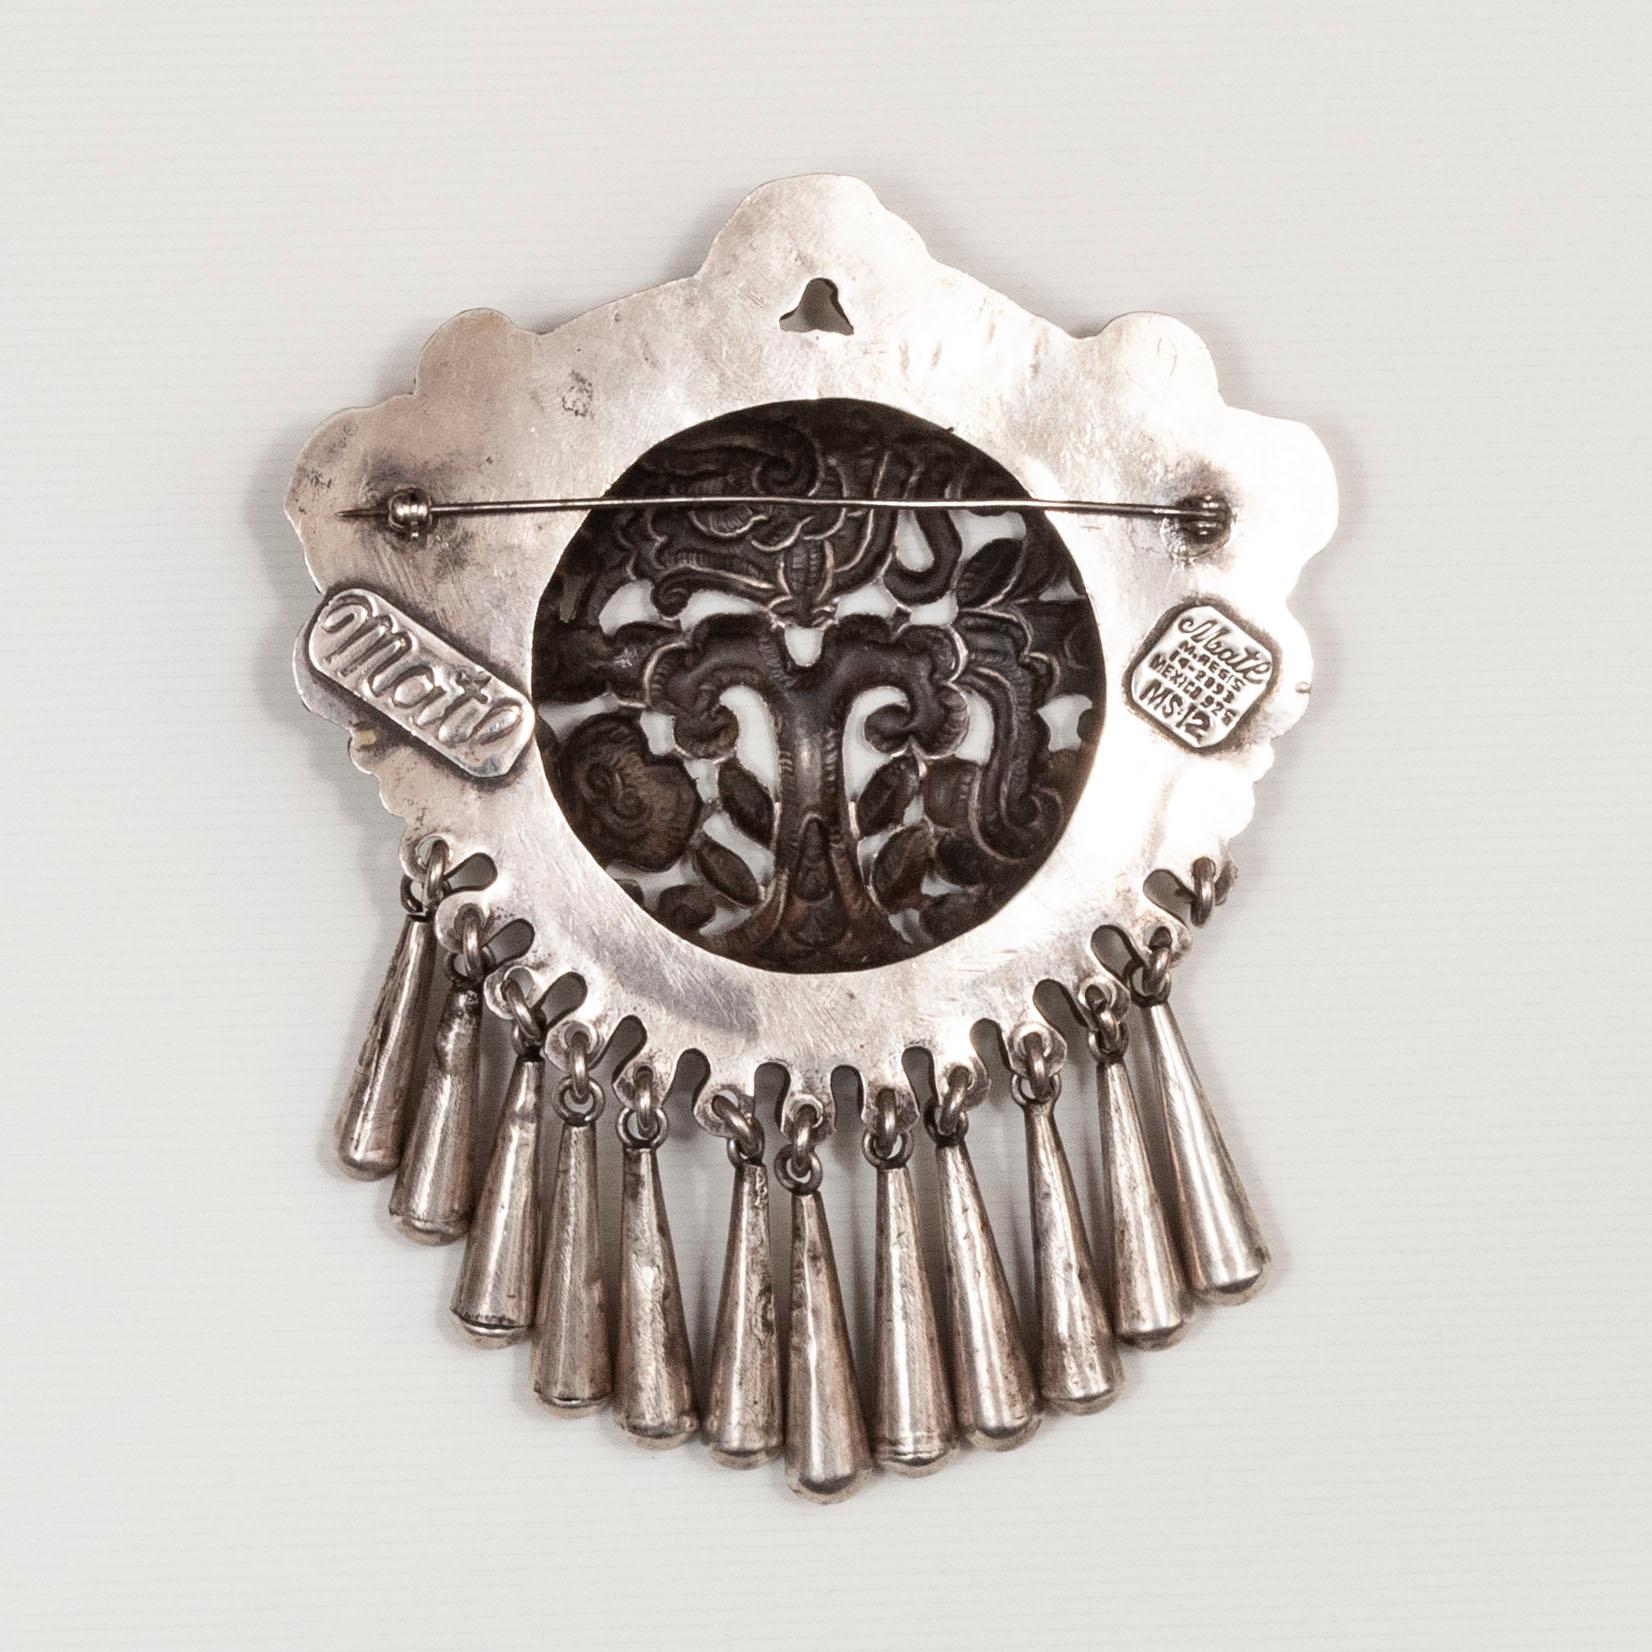 Tribal 20th Century Silver Brooch by Matilde Poulat of MATL